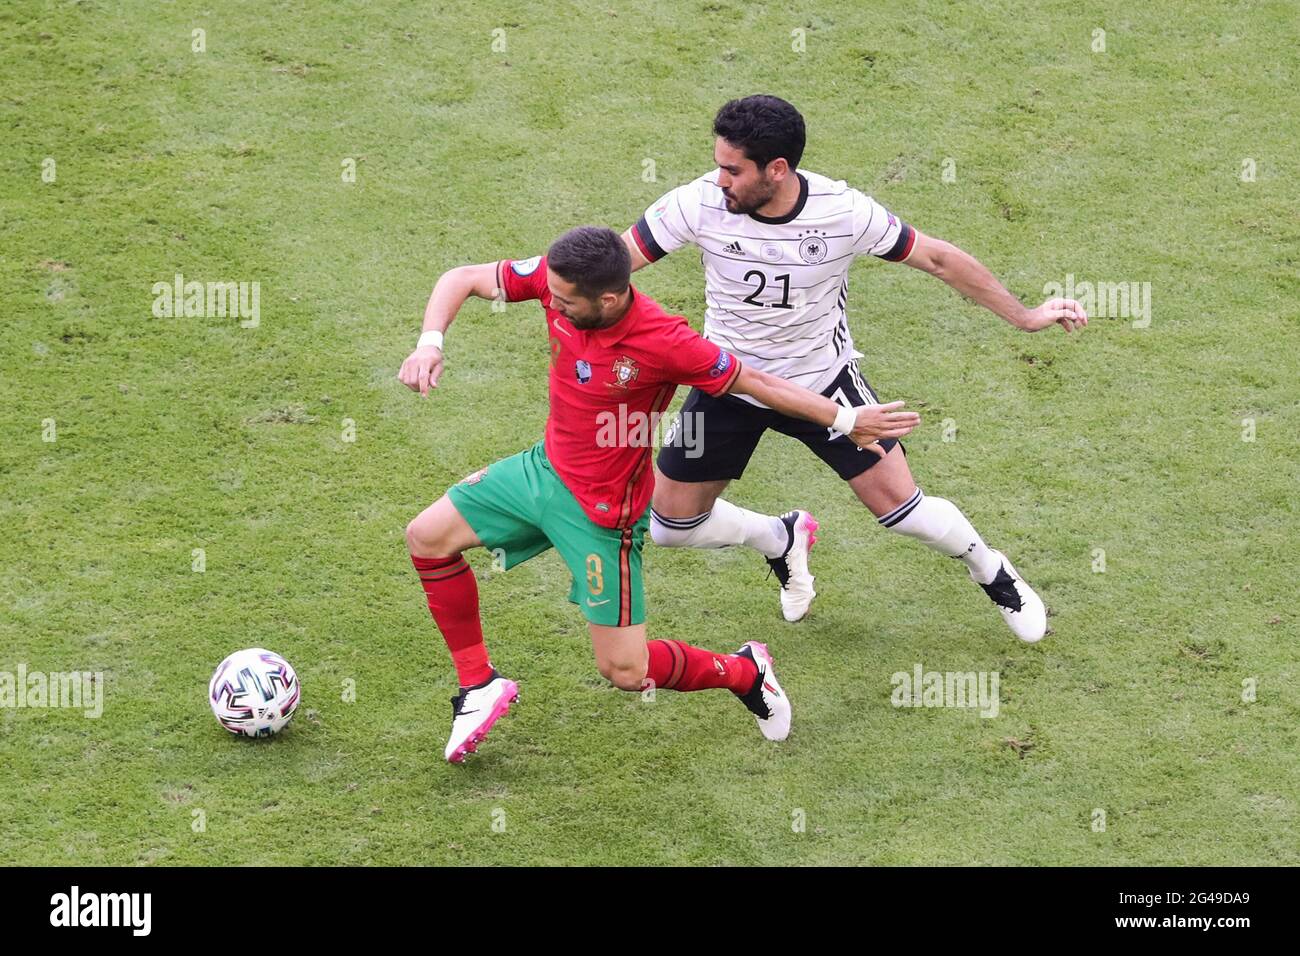 Munich, Germany. 19th June, 2021. Ilkay Guendogan (R) of Germany vies with Joao Moutinho of Portugal during the UEFA Euro 2020 Championship Group F match in Munich, Germany, June 19, 2021. Credit: Shan Yuqi/Xinhua/Alamy Live News Stock Photo